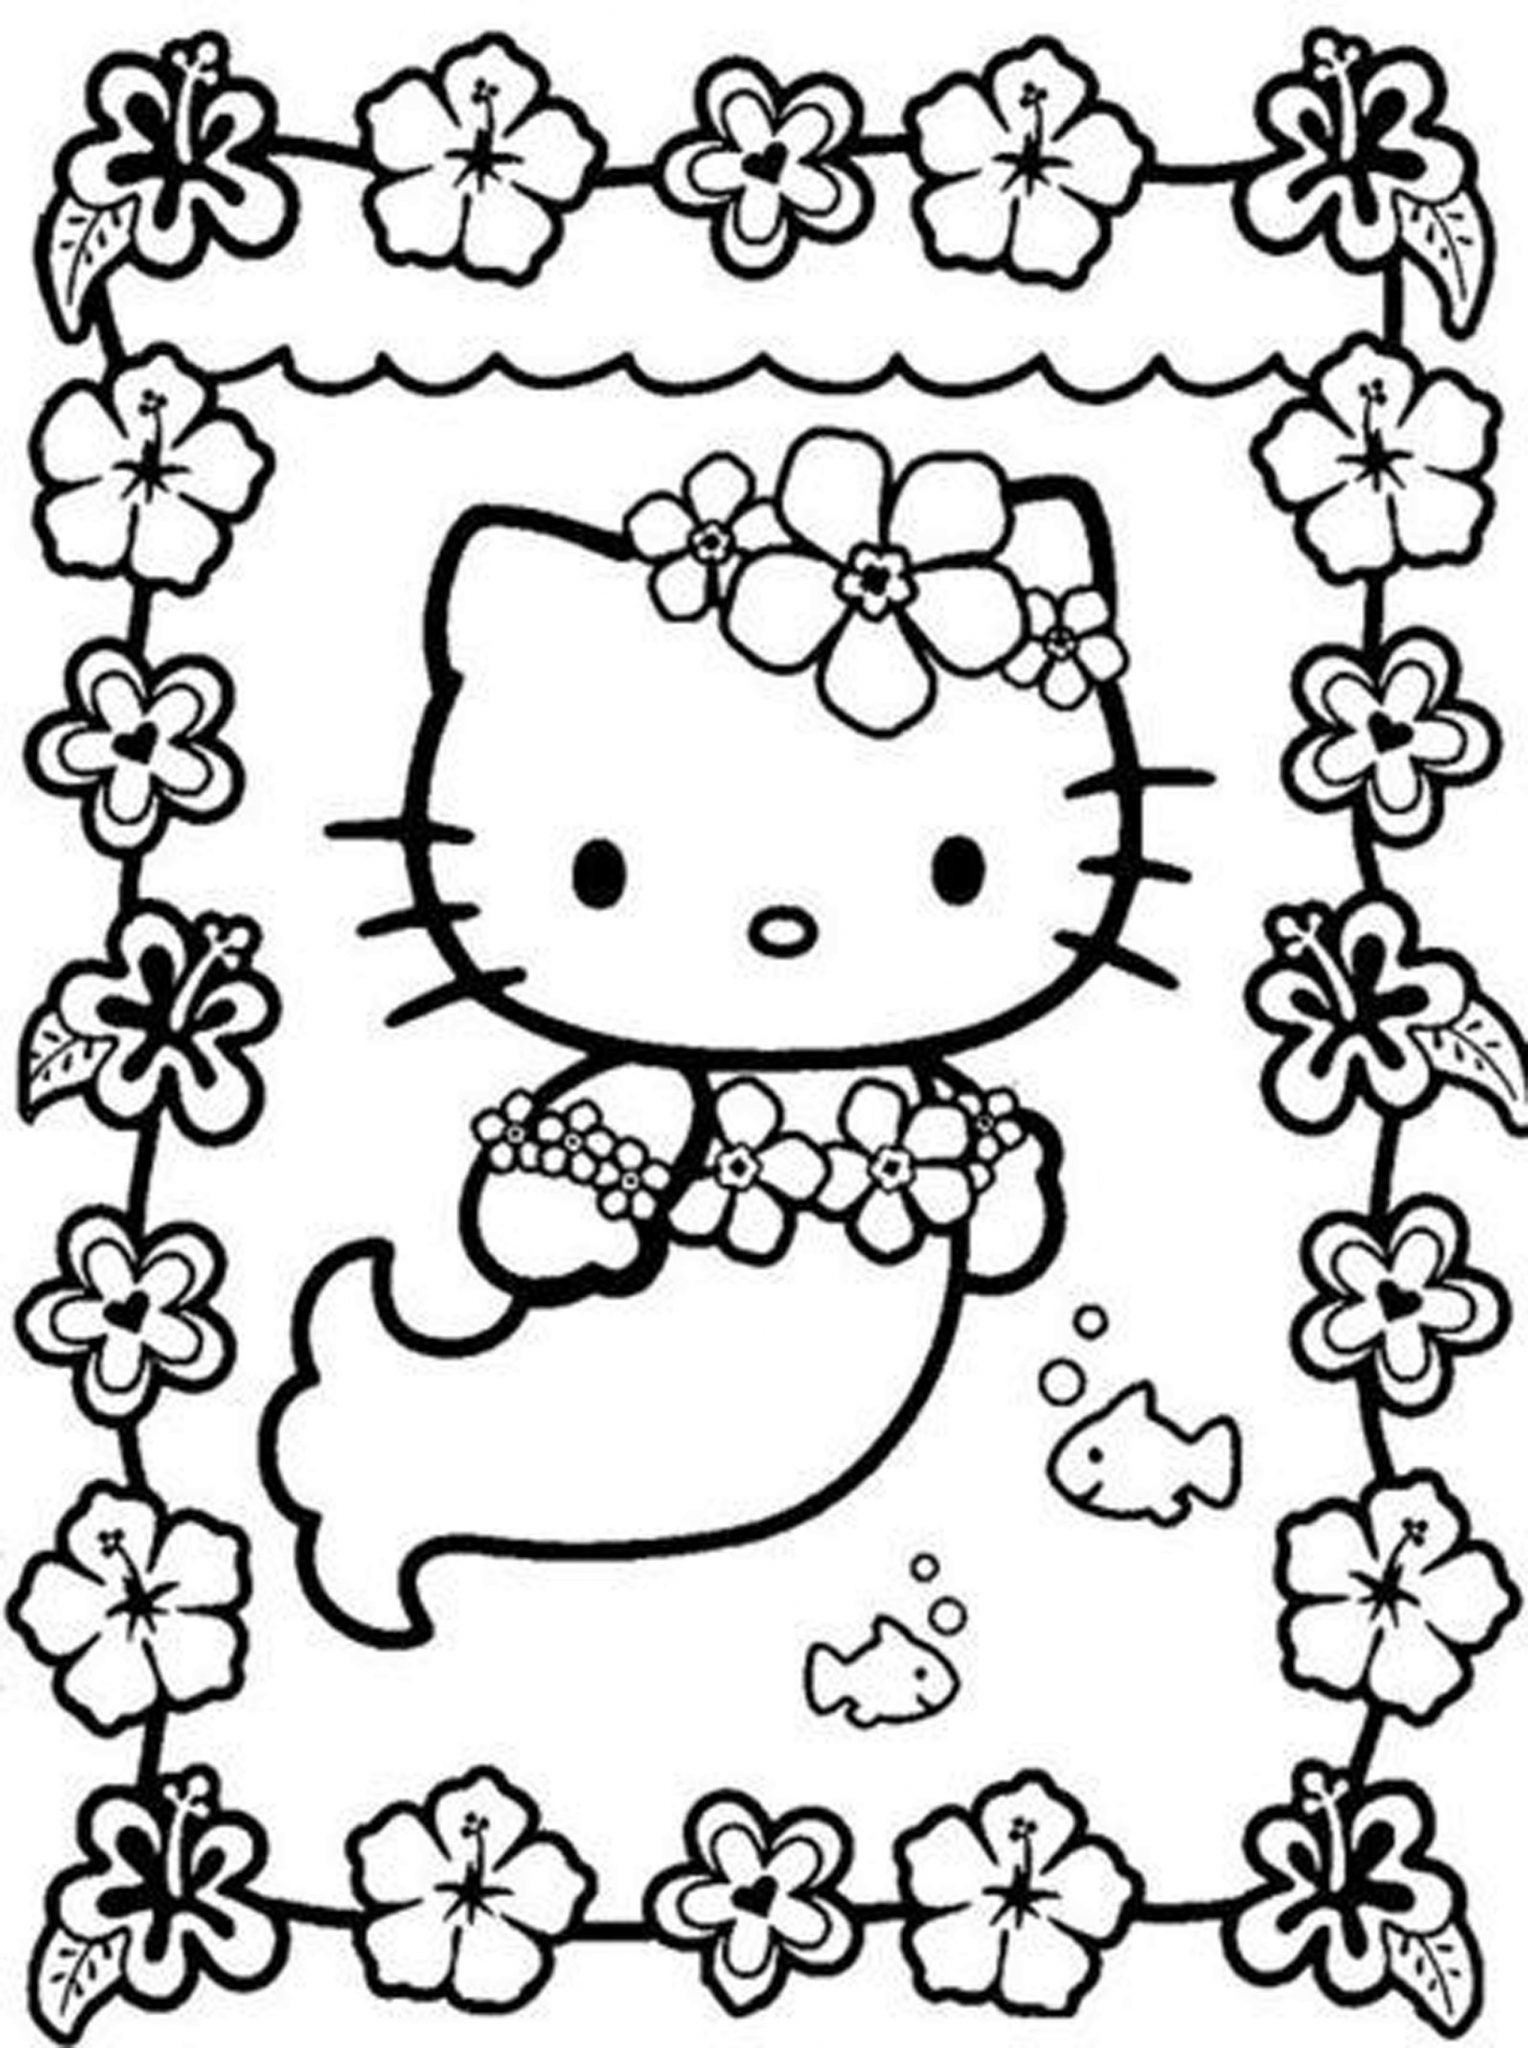 Coloring Sheets For Girls Hello Kitty
 hello kitty coloring pages for girls